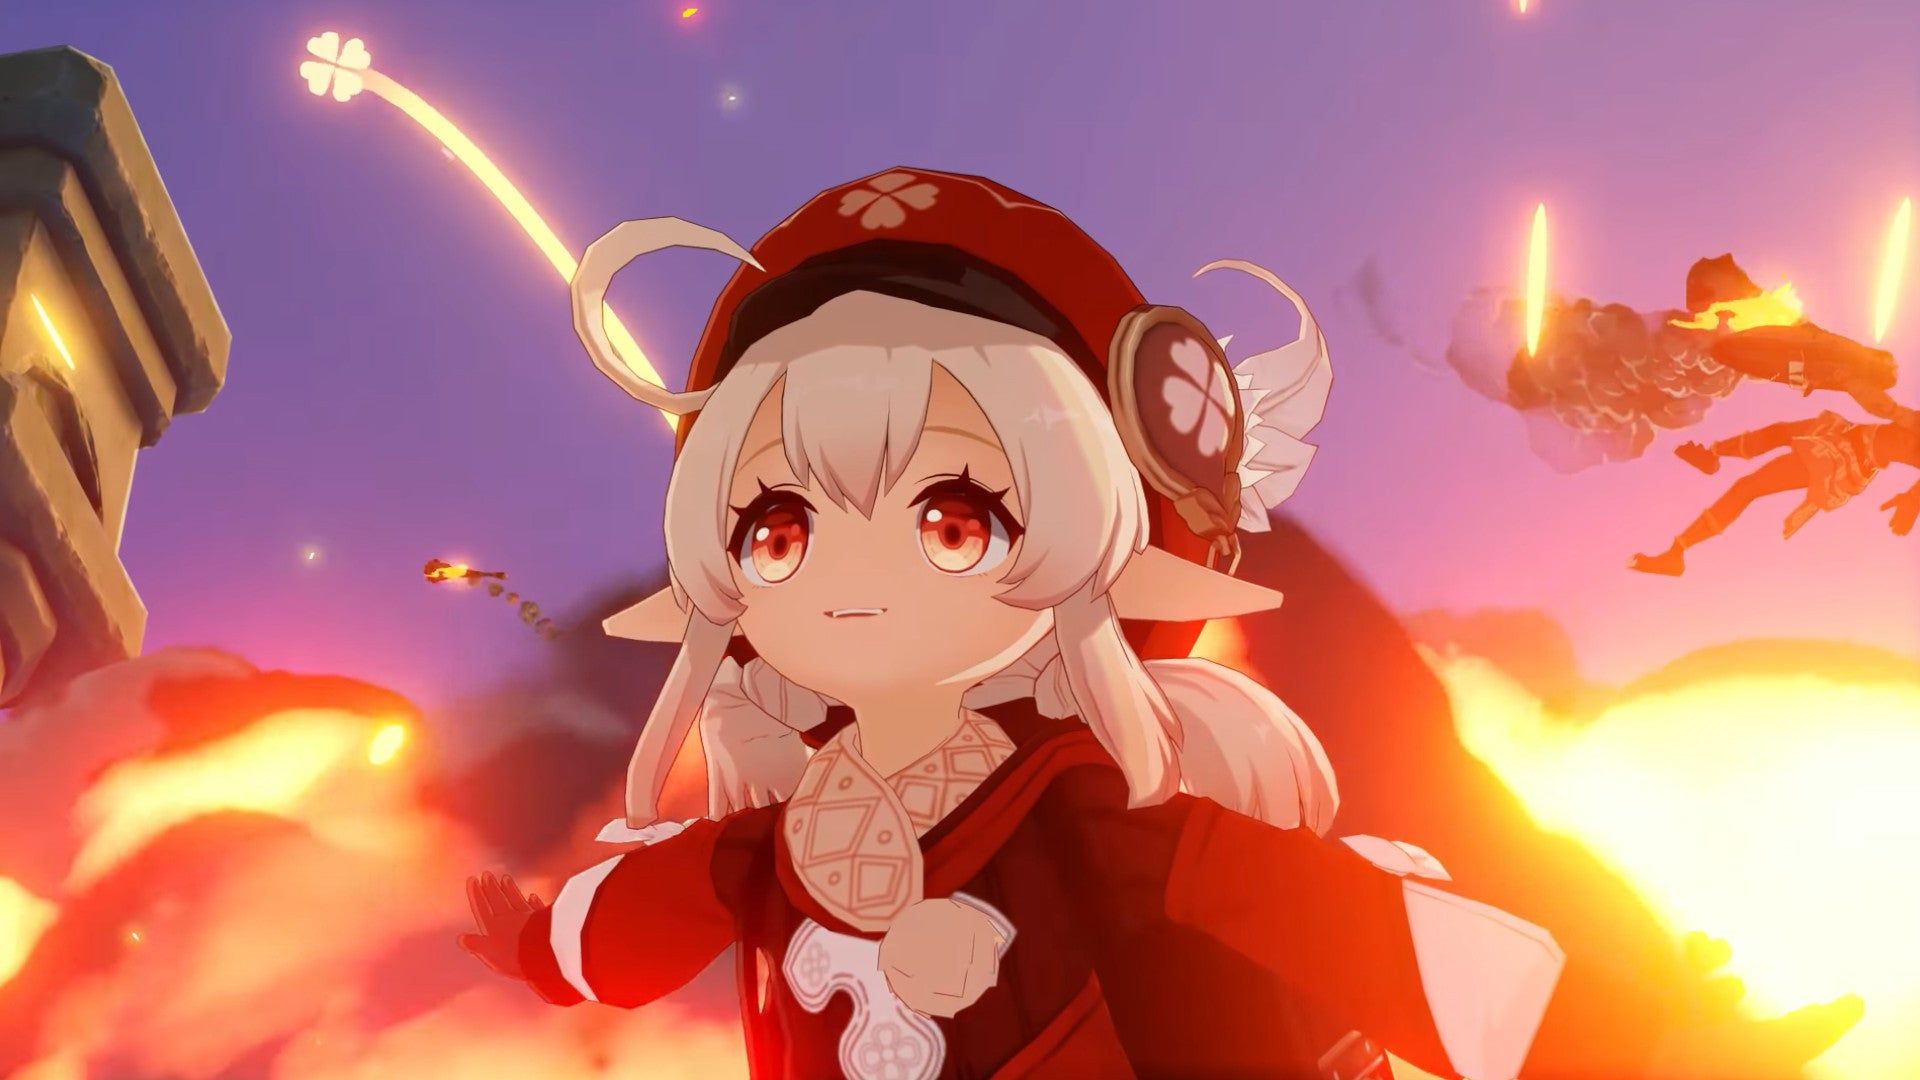 Genshin Impact's new playable character is an adorable explosives expert